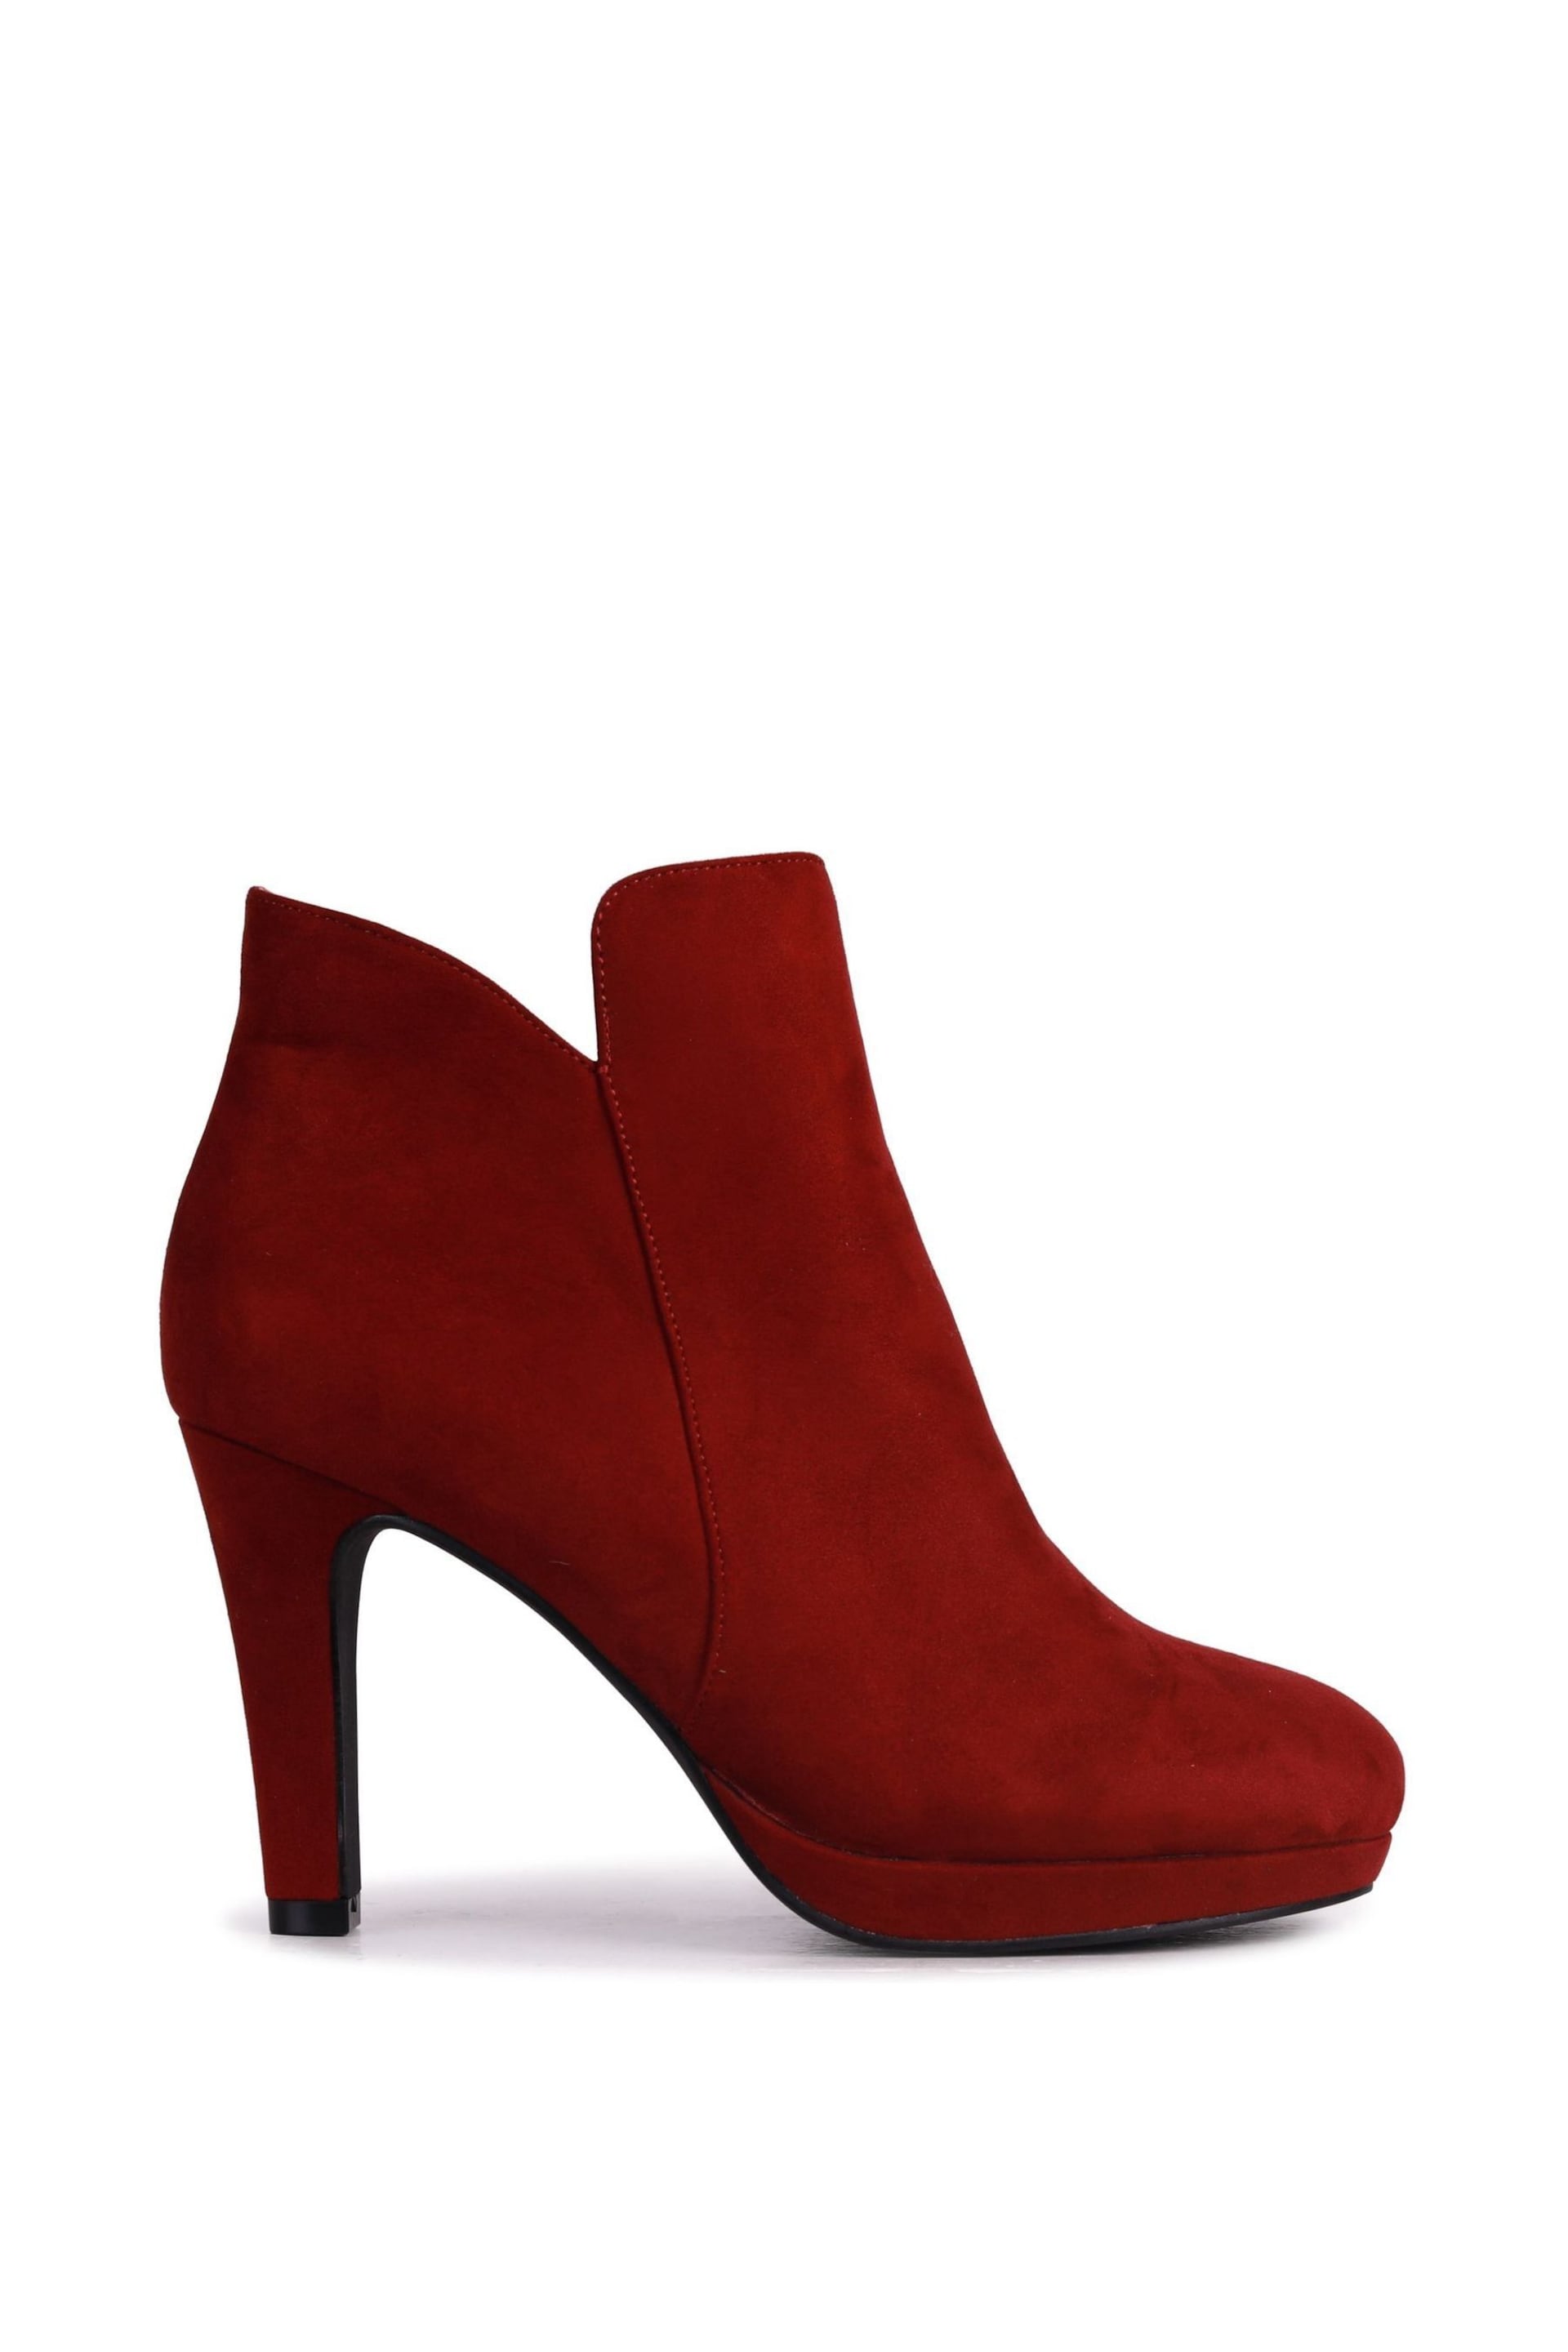 Linzi Red Layara Platform Ankle Boots With Stiletto Heels - Image 2 of 4